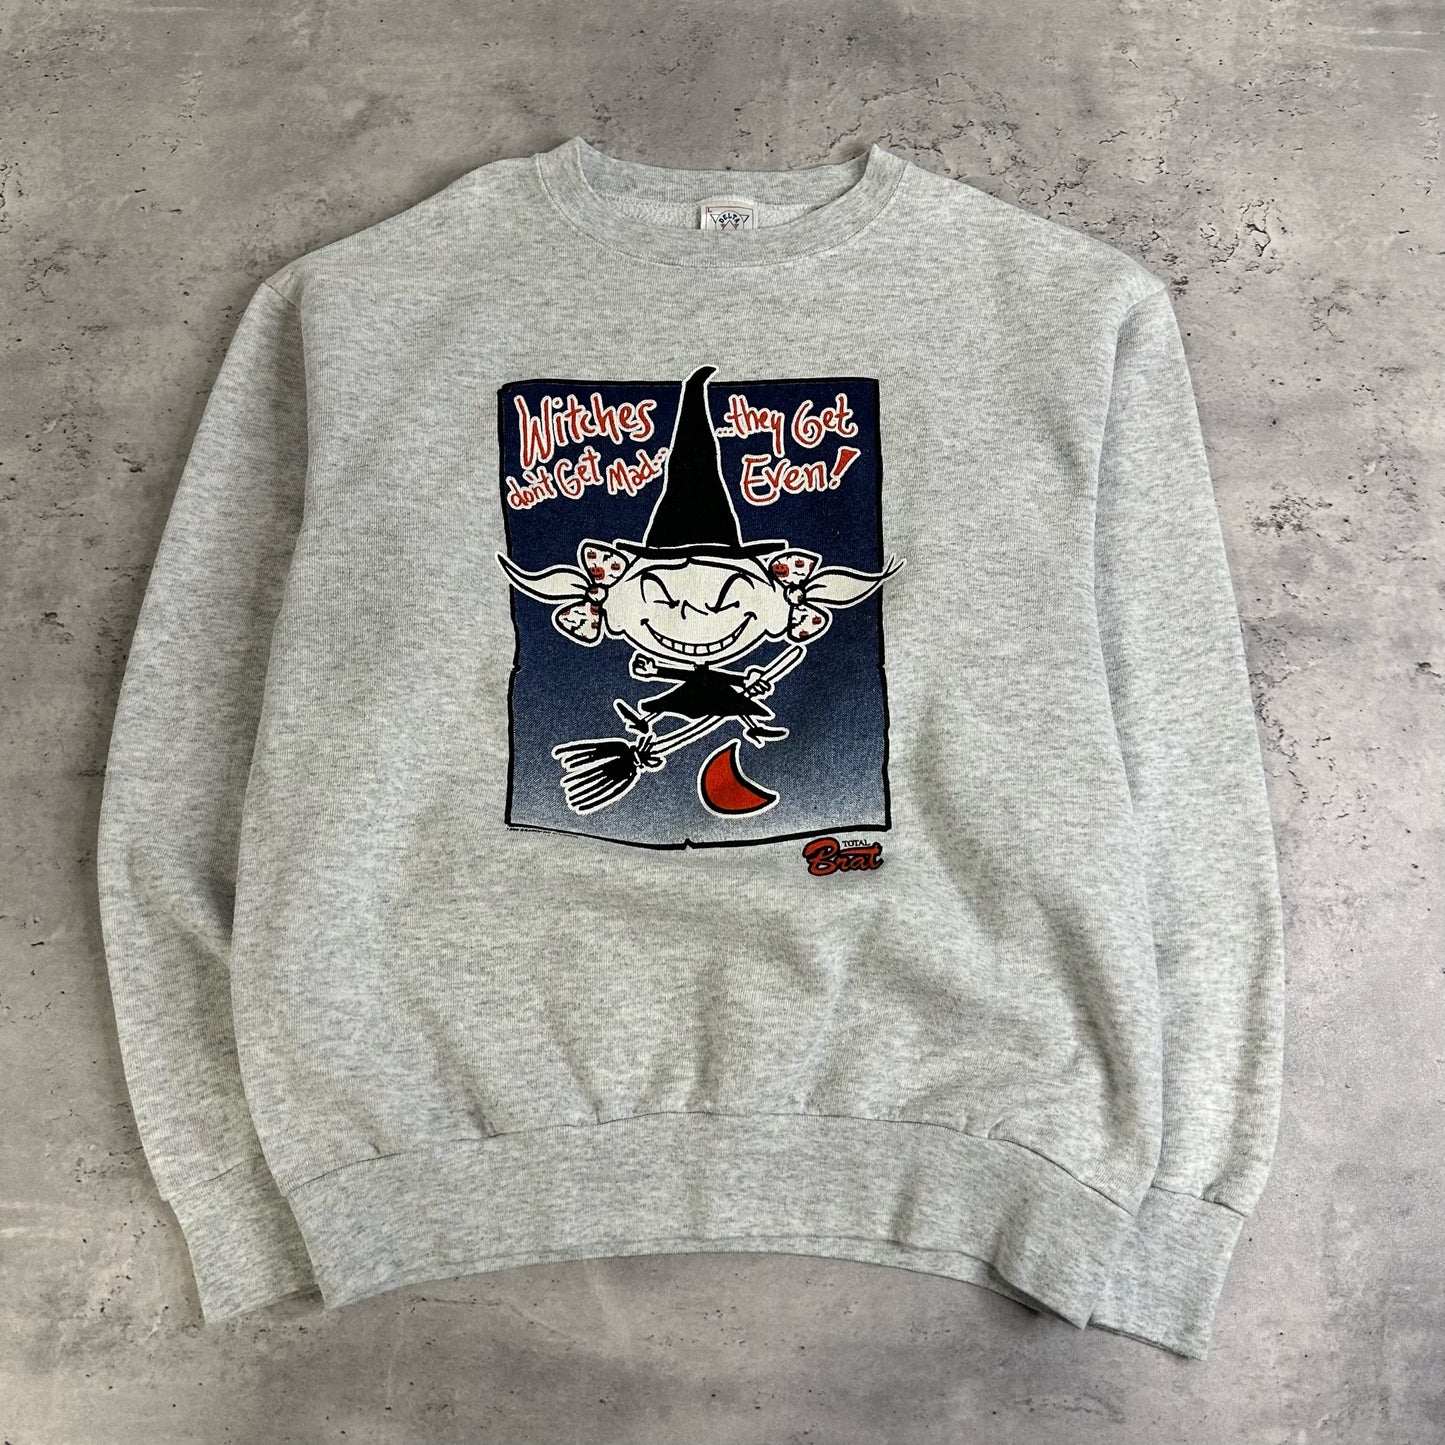 1996 Witches Get Even Sweatshirt size L